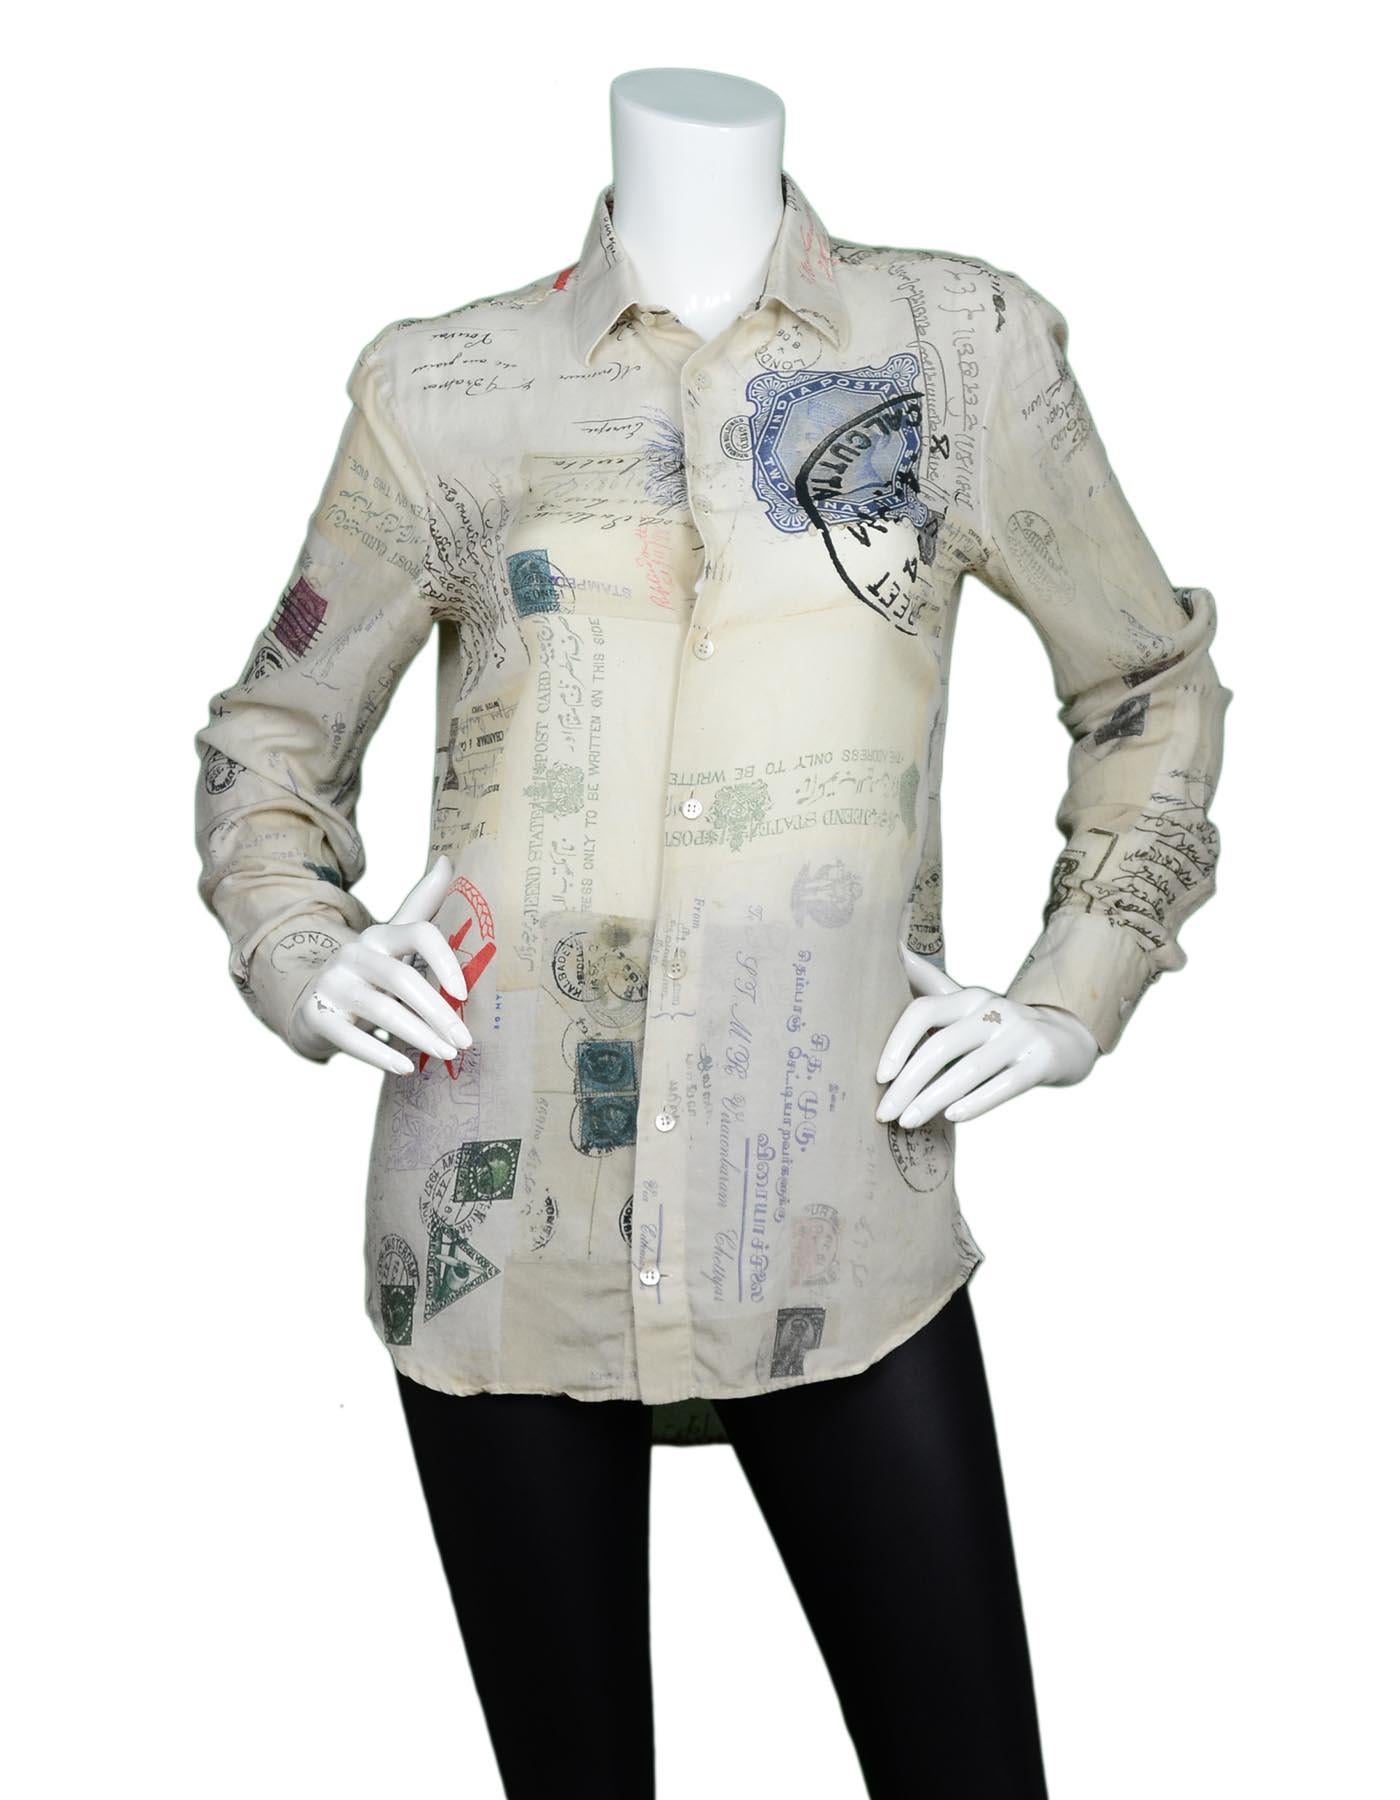 Alexander McQueen Beige Cotton/Silk Longsleeve Postcard Blouse Sz S

Made In: Romania
Color: Beige, multi-color
Materials: 63% cotton, 37% silk
Opening/Closure: Button down
Overall Condition: Excellent pre-owned condition 

Measurements: 
Shoulder